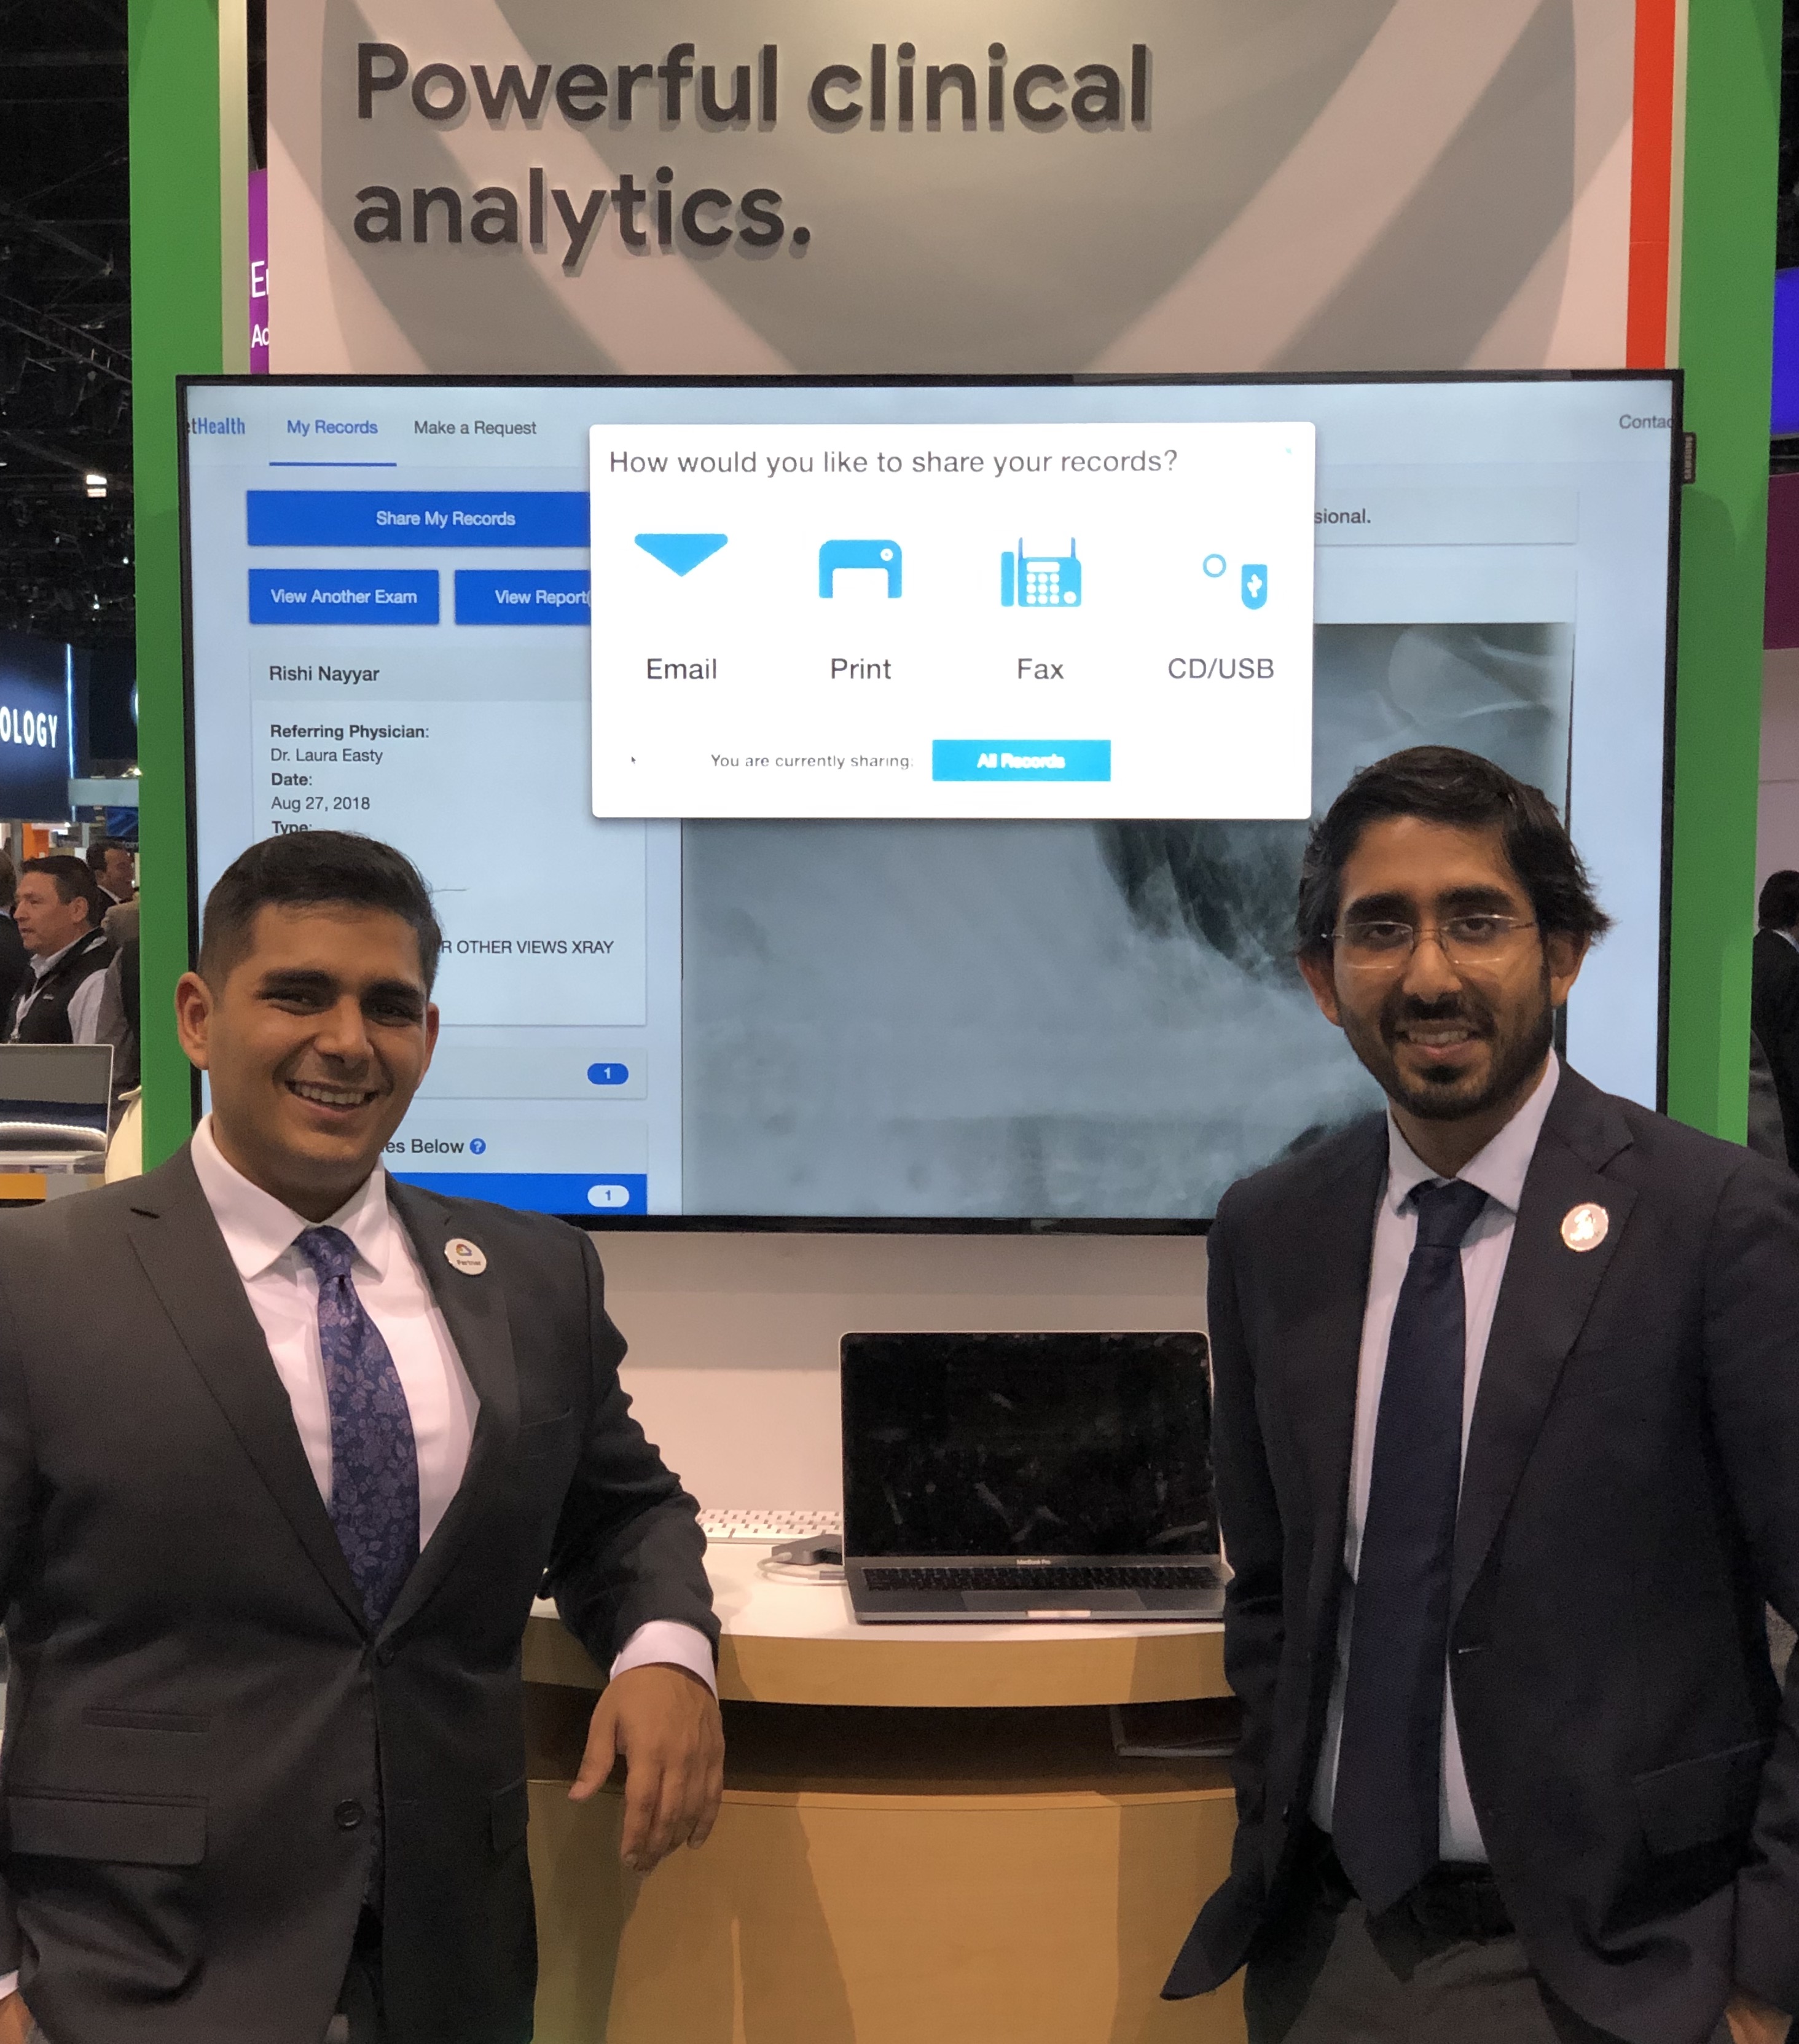 Co-Founders Rishi (left) and Harsh showing PocketHealth in the Google Cloud booth at the 2018 RSNA radiology convention